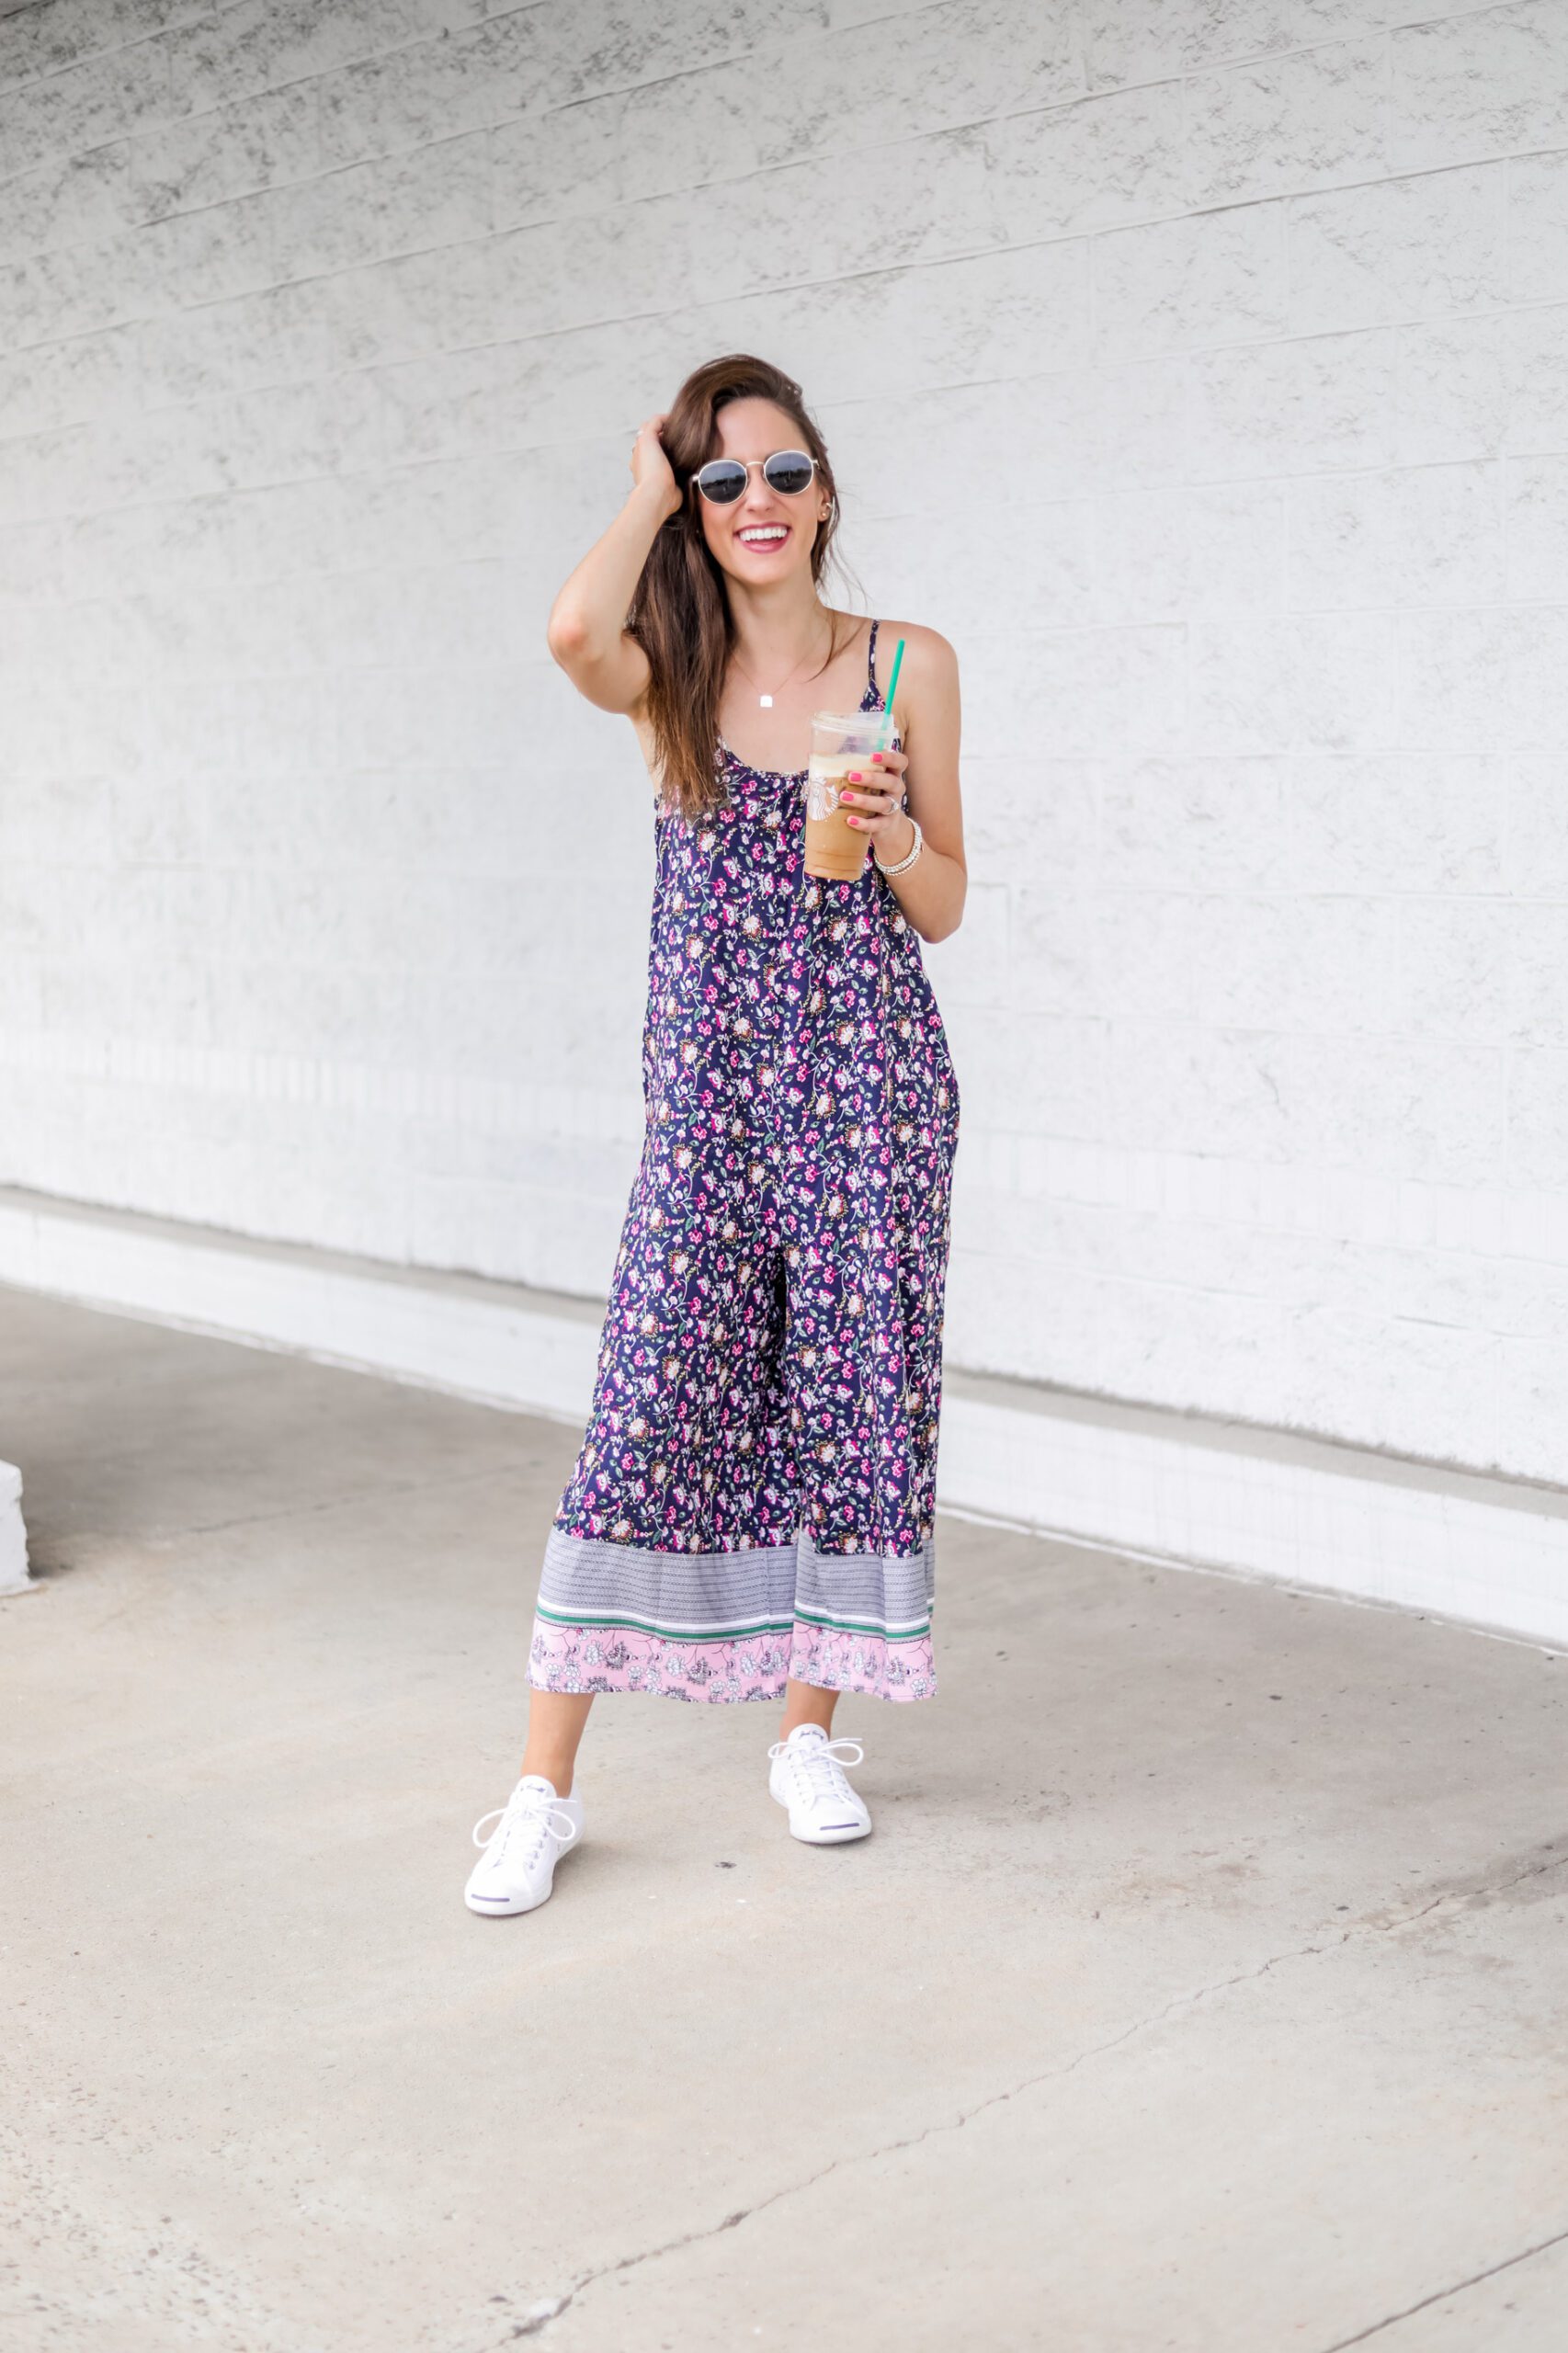 $17 AMAZON JUMPSUIT - Pretty floral prints and easy, breezy fit for everyday wear!